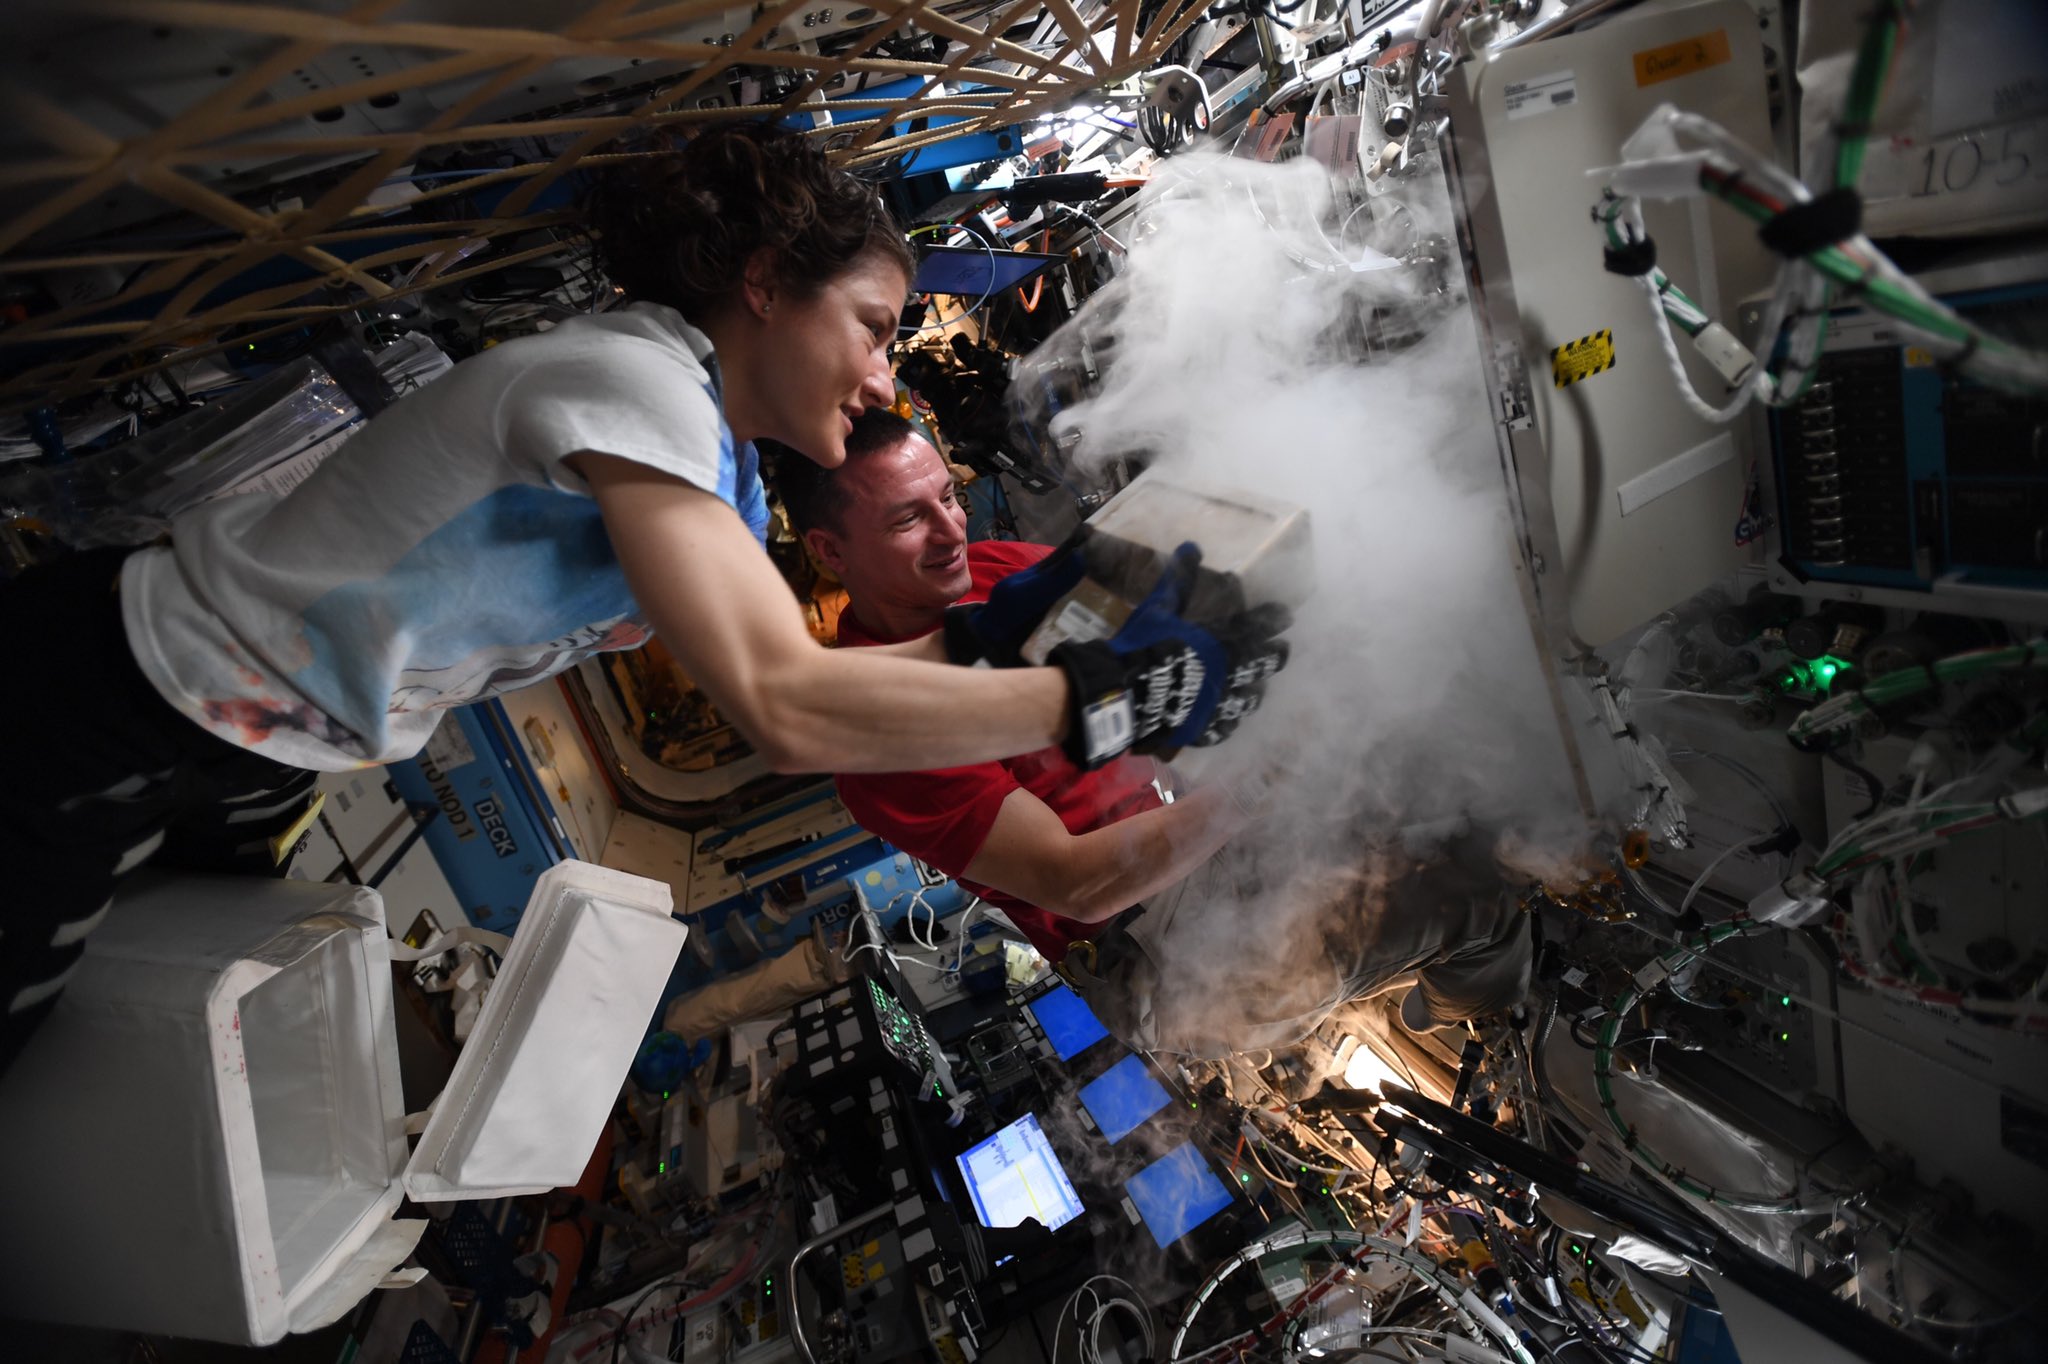 Two astronauts working on an experiment in space